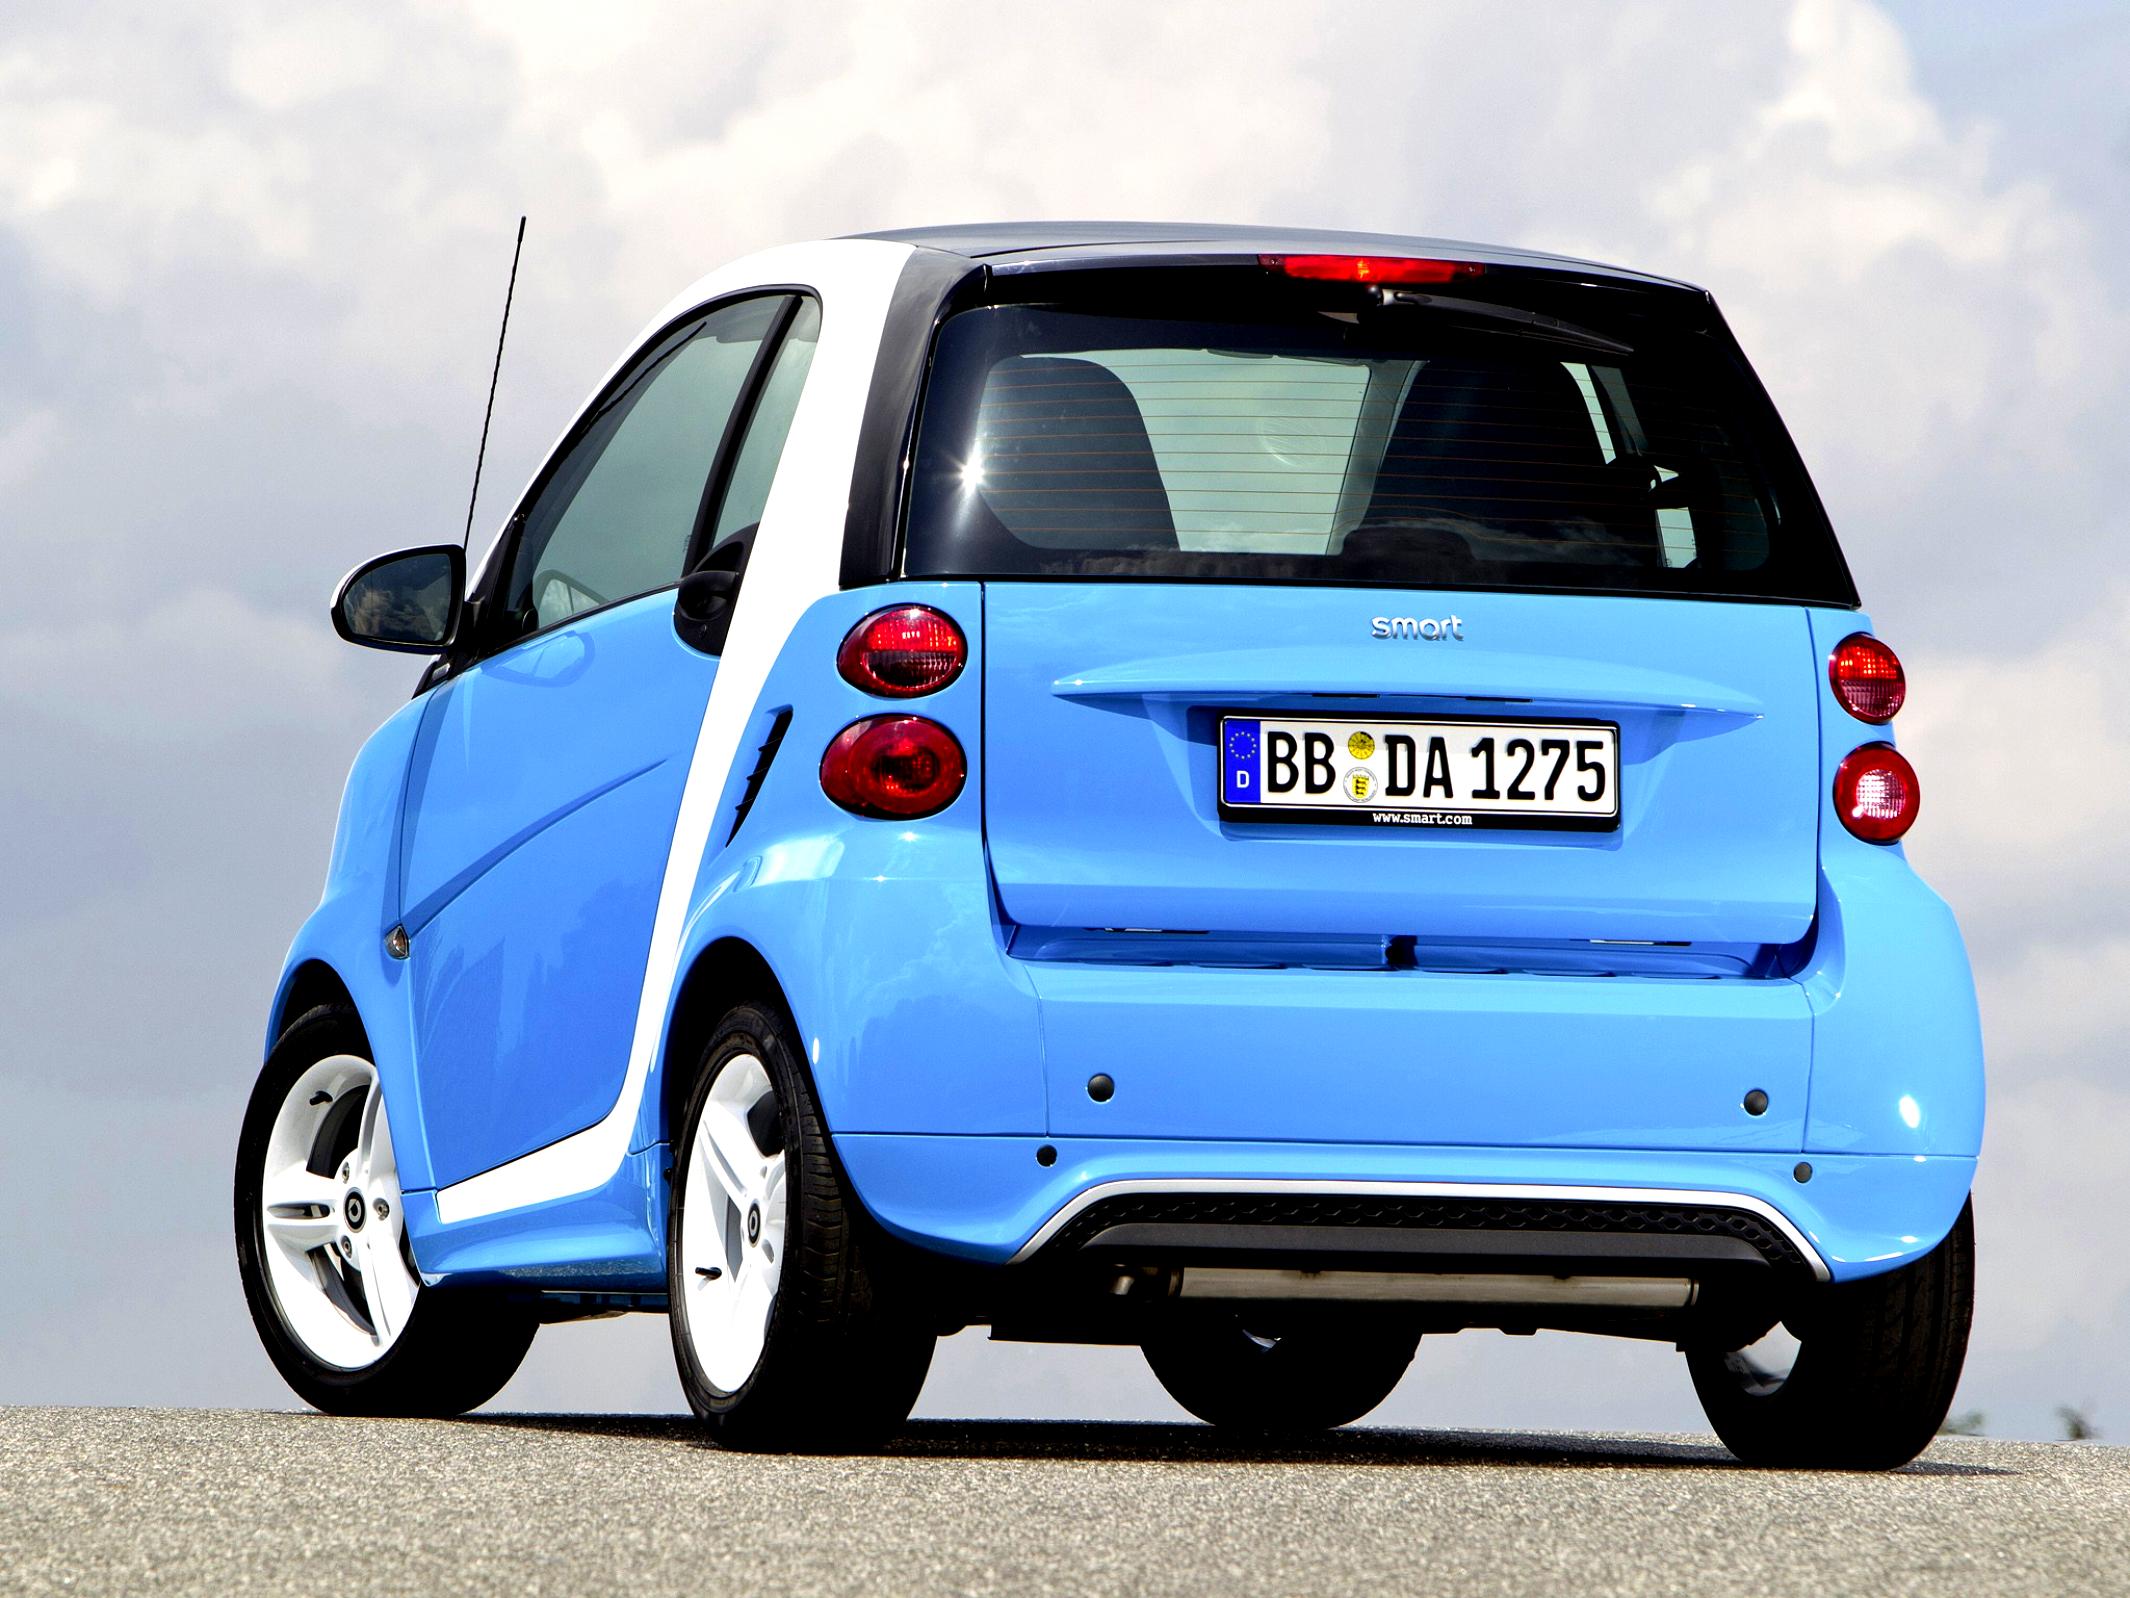 Smart ForTwo 2012 #1